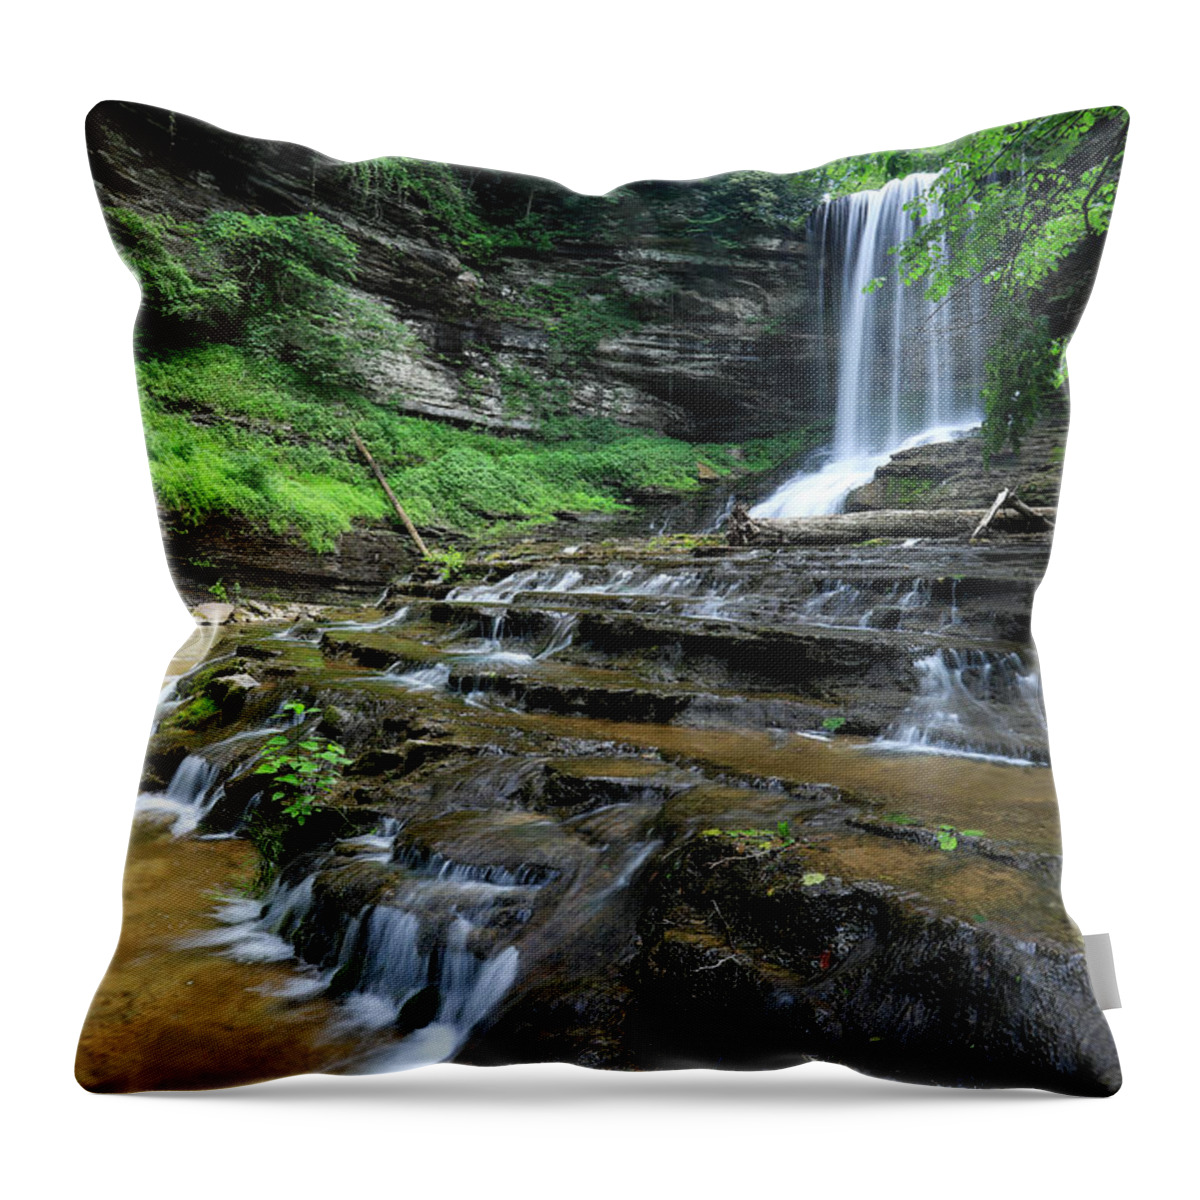 Landscape Throw Pillow featuring the photograph Abrams Falls by Chris Berrier